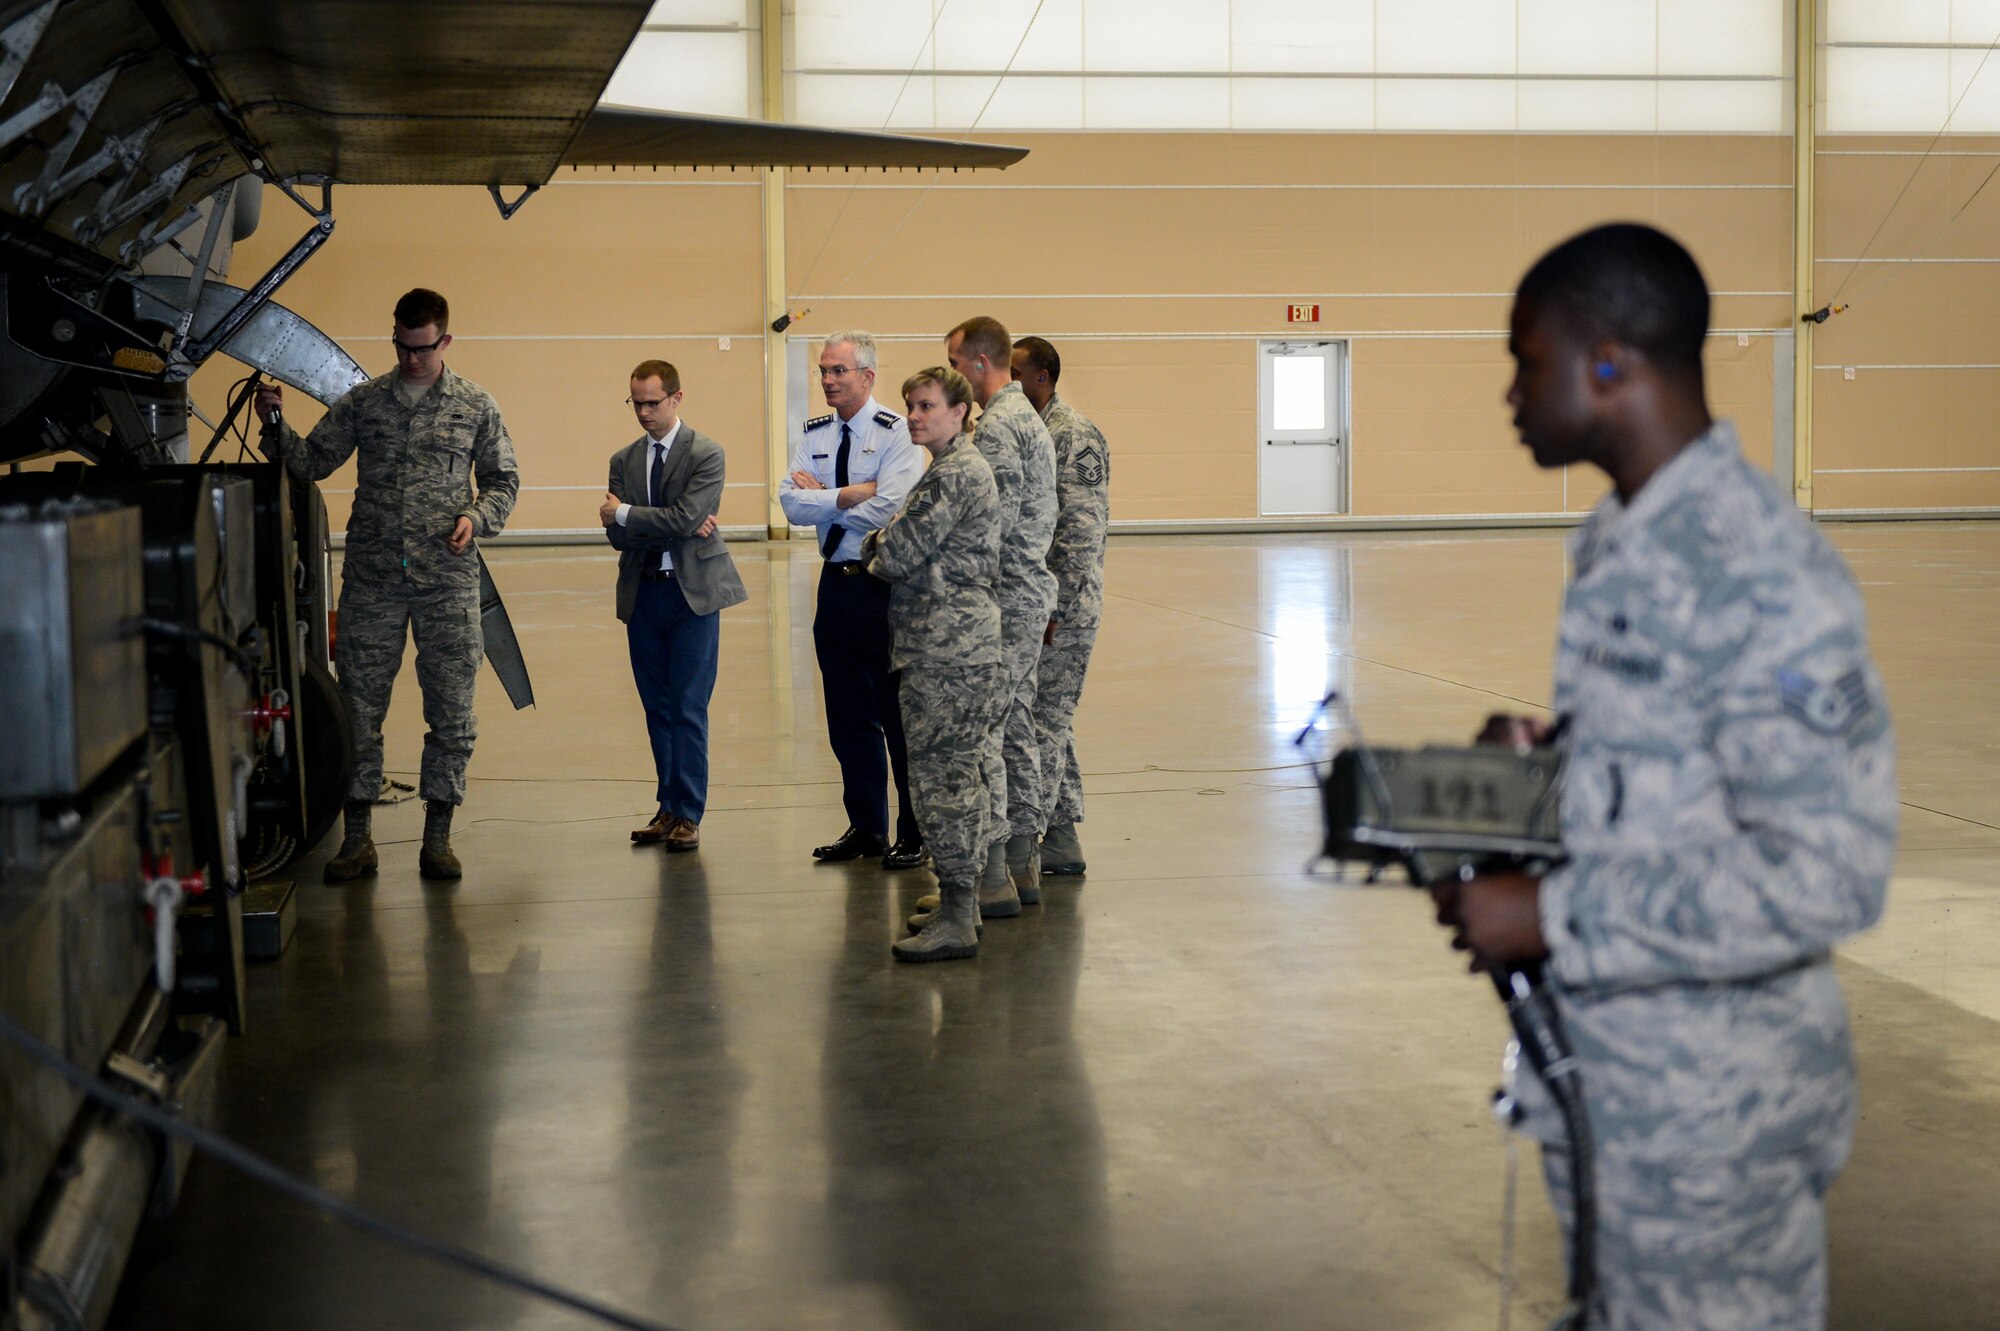 Gen. Paul J. Selva, vice chairman of the Joint Chiefs of Staff, observes a munitions loading demonstration during a nuclear enterprise immersion tour at Barksdale Air Force Base, La., May 1, 2017. A weapons load crew team of four Airmen demonstrated the steps required to load munitions in to a B-52 Stratofortress. During the tour Selva met with senior leadership to discuss the importance of the nuclear enterprise and thank the Airmen at Barksdale for the role they play in the U.S. deterrence mission.  (U.S. Air Force photo/Senior Airman Mozer O. Da Cunha)